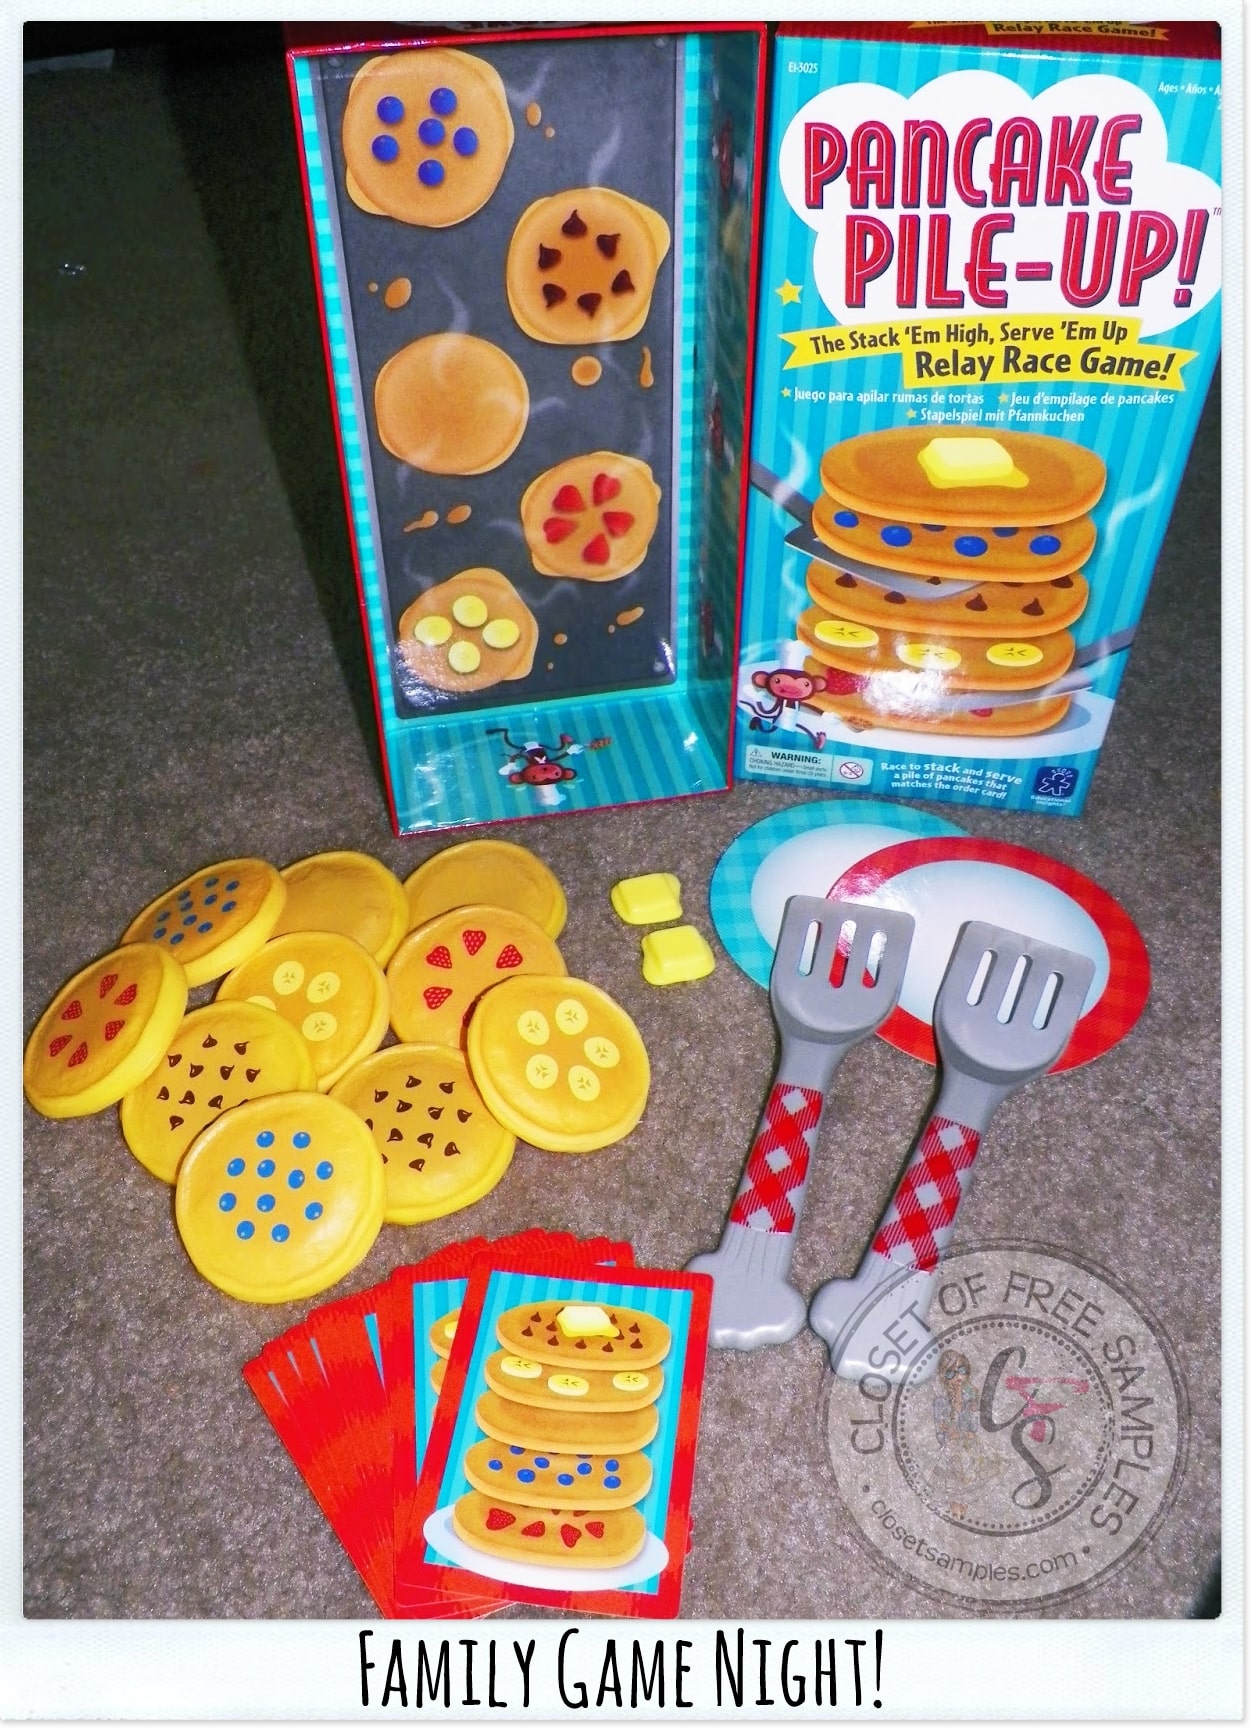 Family-Game-Night-Pancake-Pile-Up-Relay-Game-Review-Giveaway.JPG